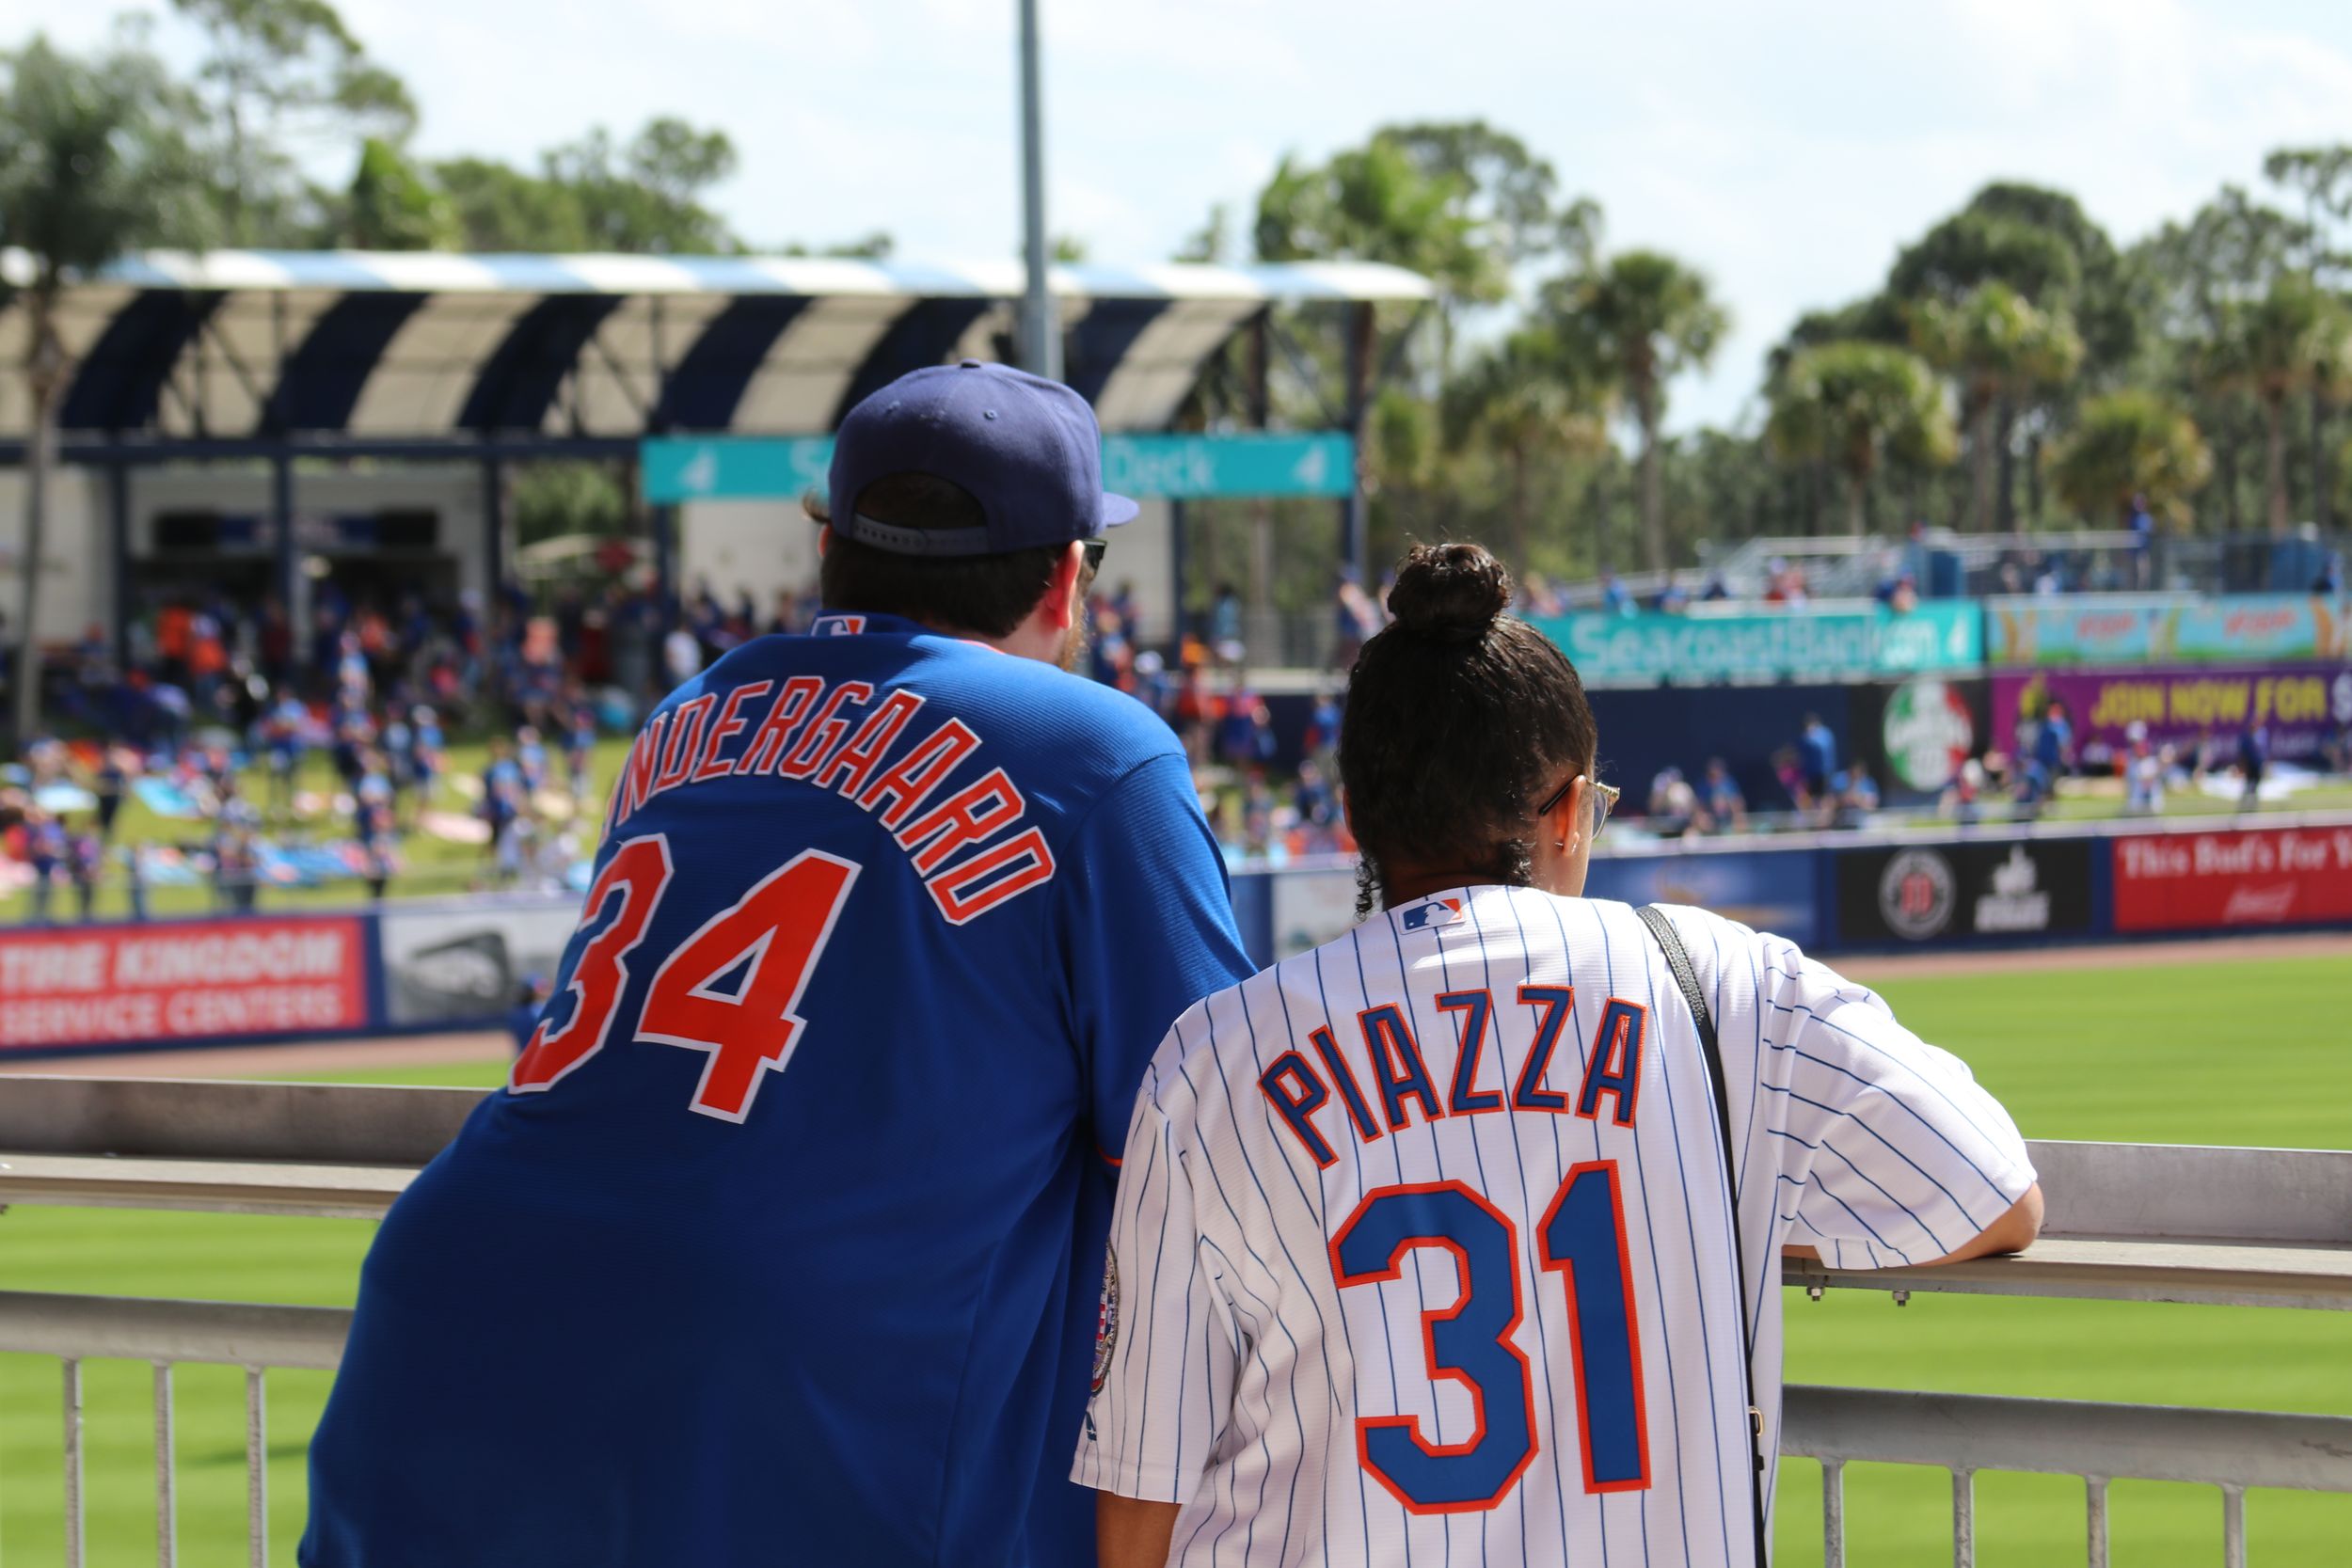 Two people in Mets jerseys enjoying a spring training game at Clover Park.